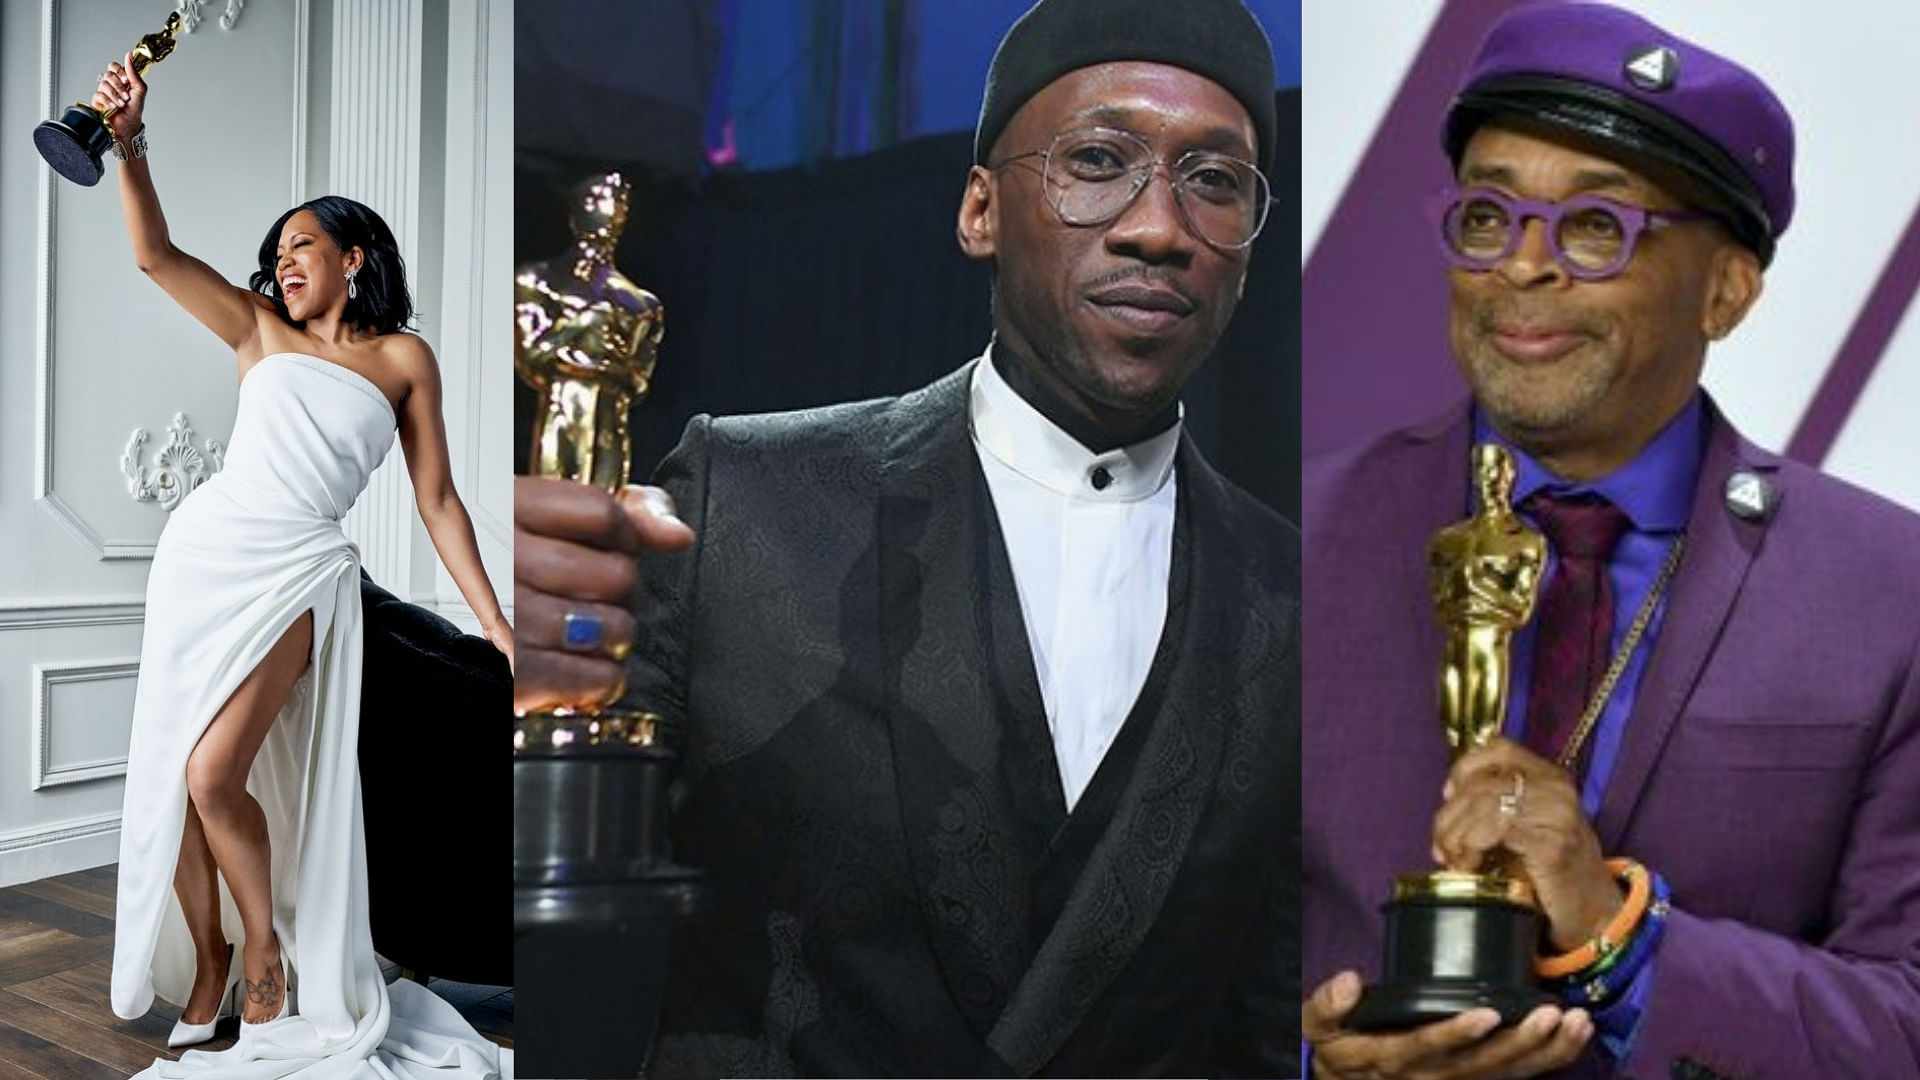 From Best Supporting Actors, to Best Costume &amp; Production Design - a new era has been ushered in for black artists.